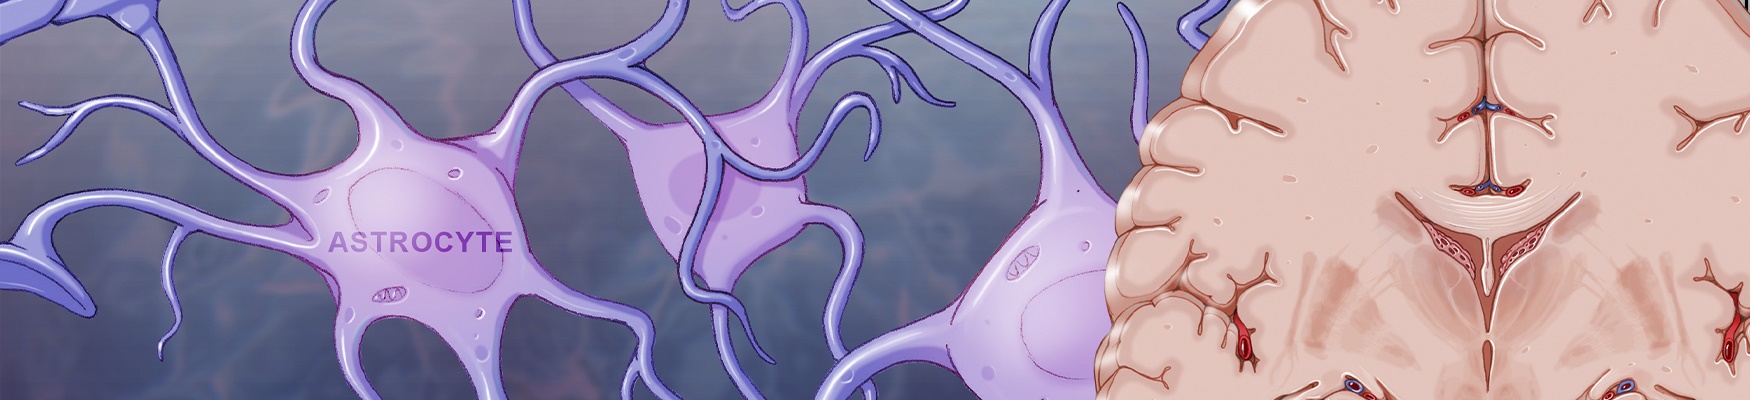 drawn image of astrocytes and brain as promo image